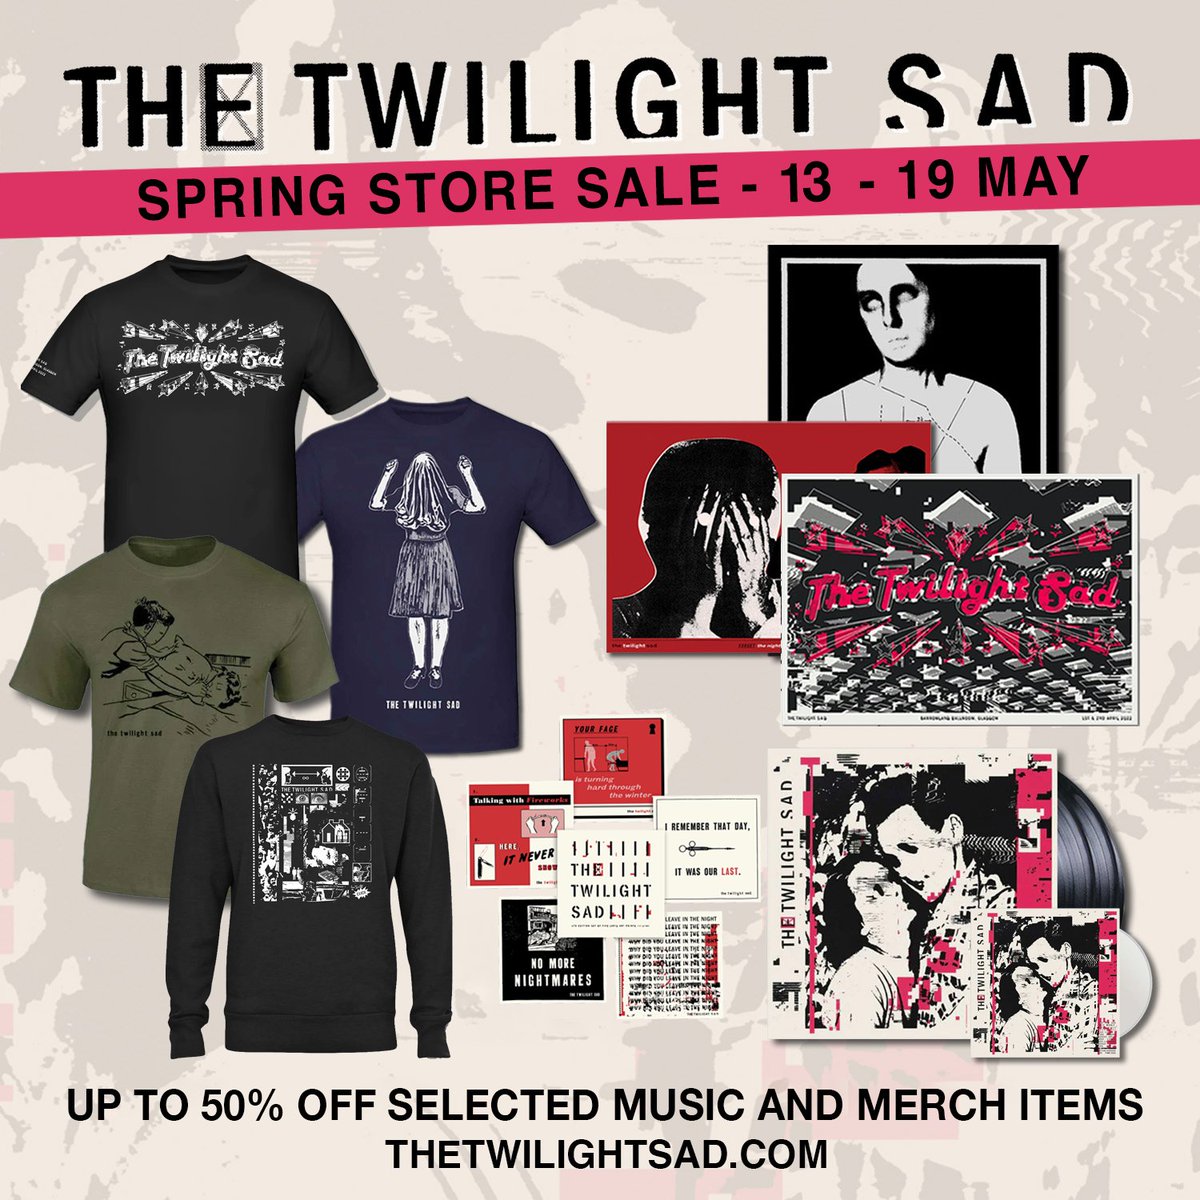 📢 SPRING SALE 📢 We have up to 50% off selected items in our spring sale from now until 19th May. Now is the time to stock up on those Sad summer tees and water bottles ⚡️ Head to our store thetwilightsad.com/collections/me…